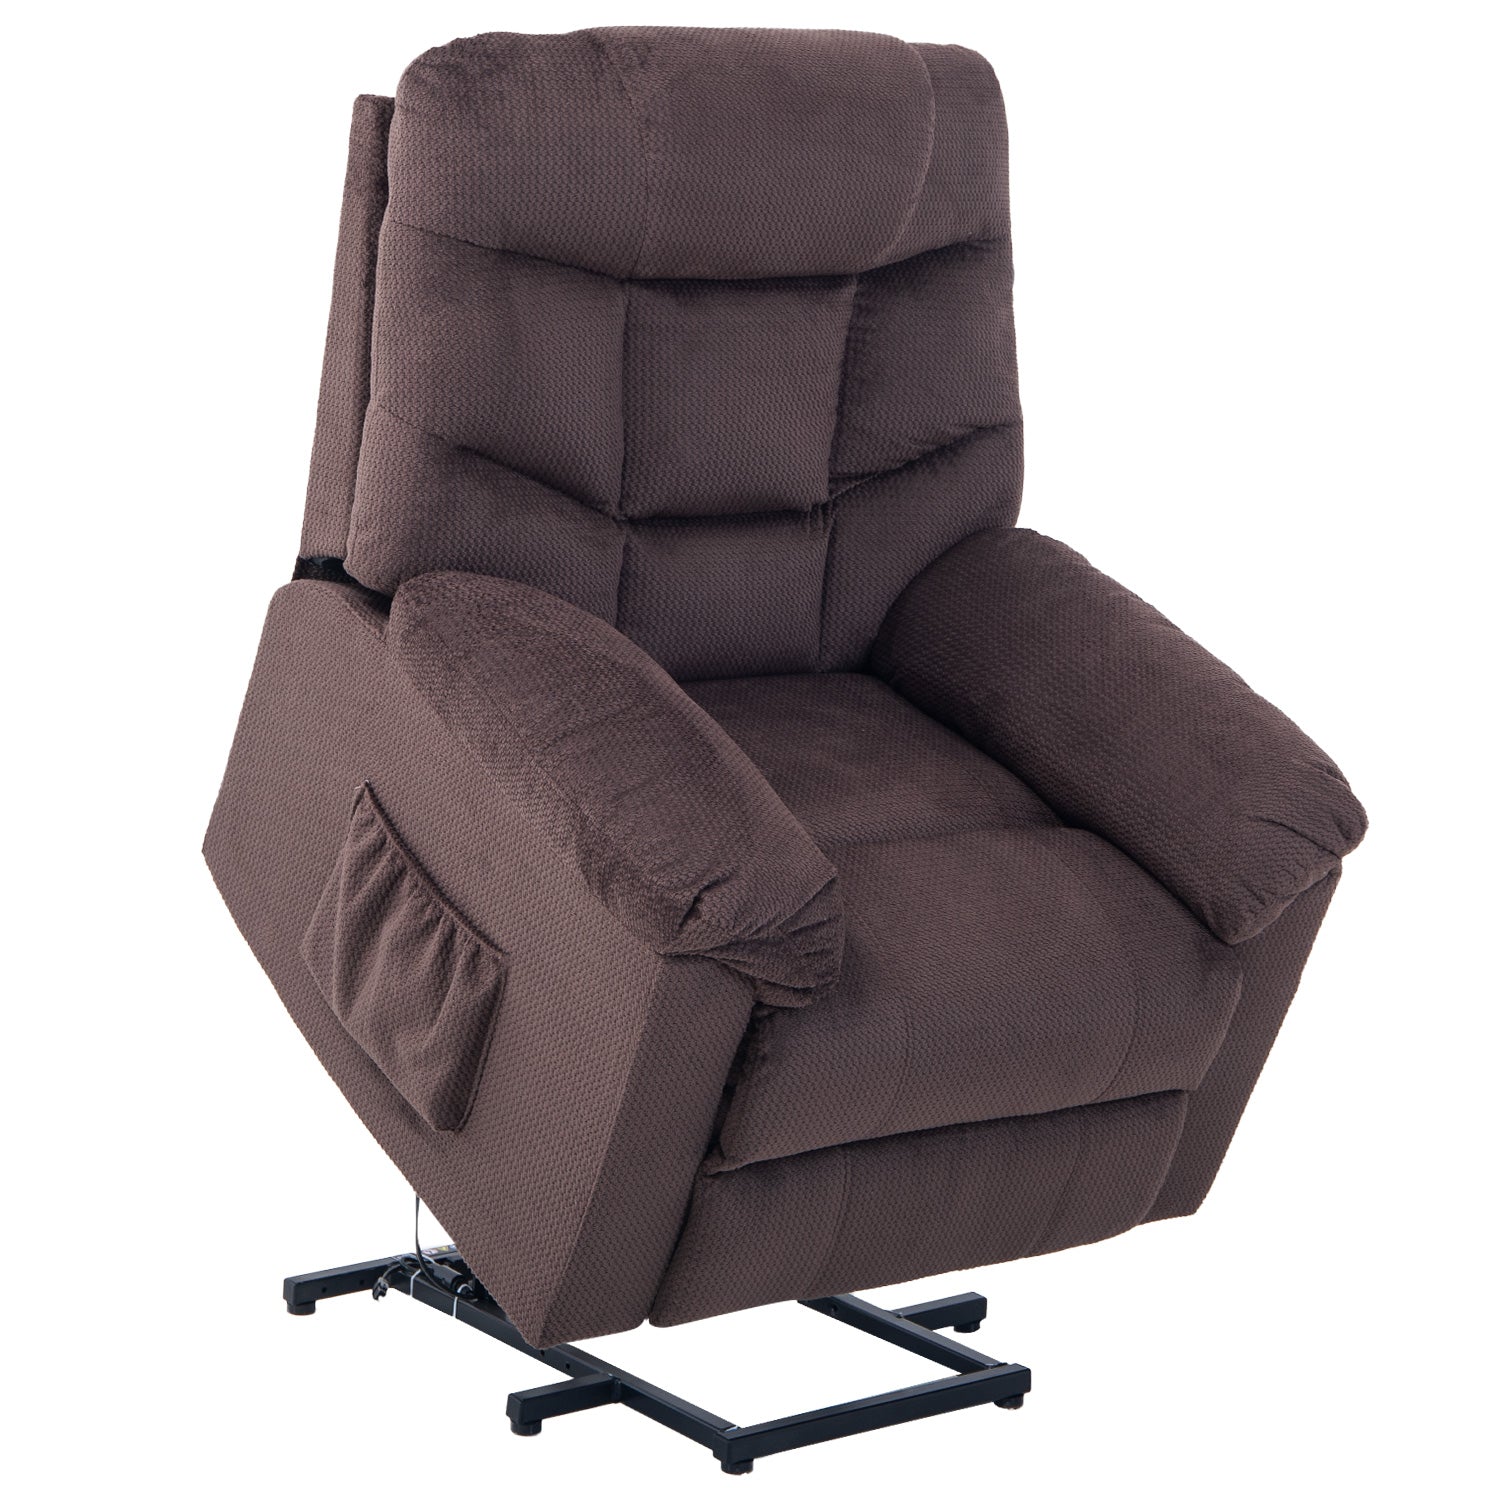 Power Lift Recliner Chair Upholstered Fabric with Remote Control for Living Room-Boyel Living